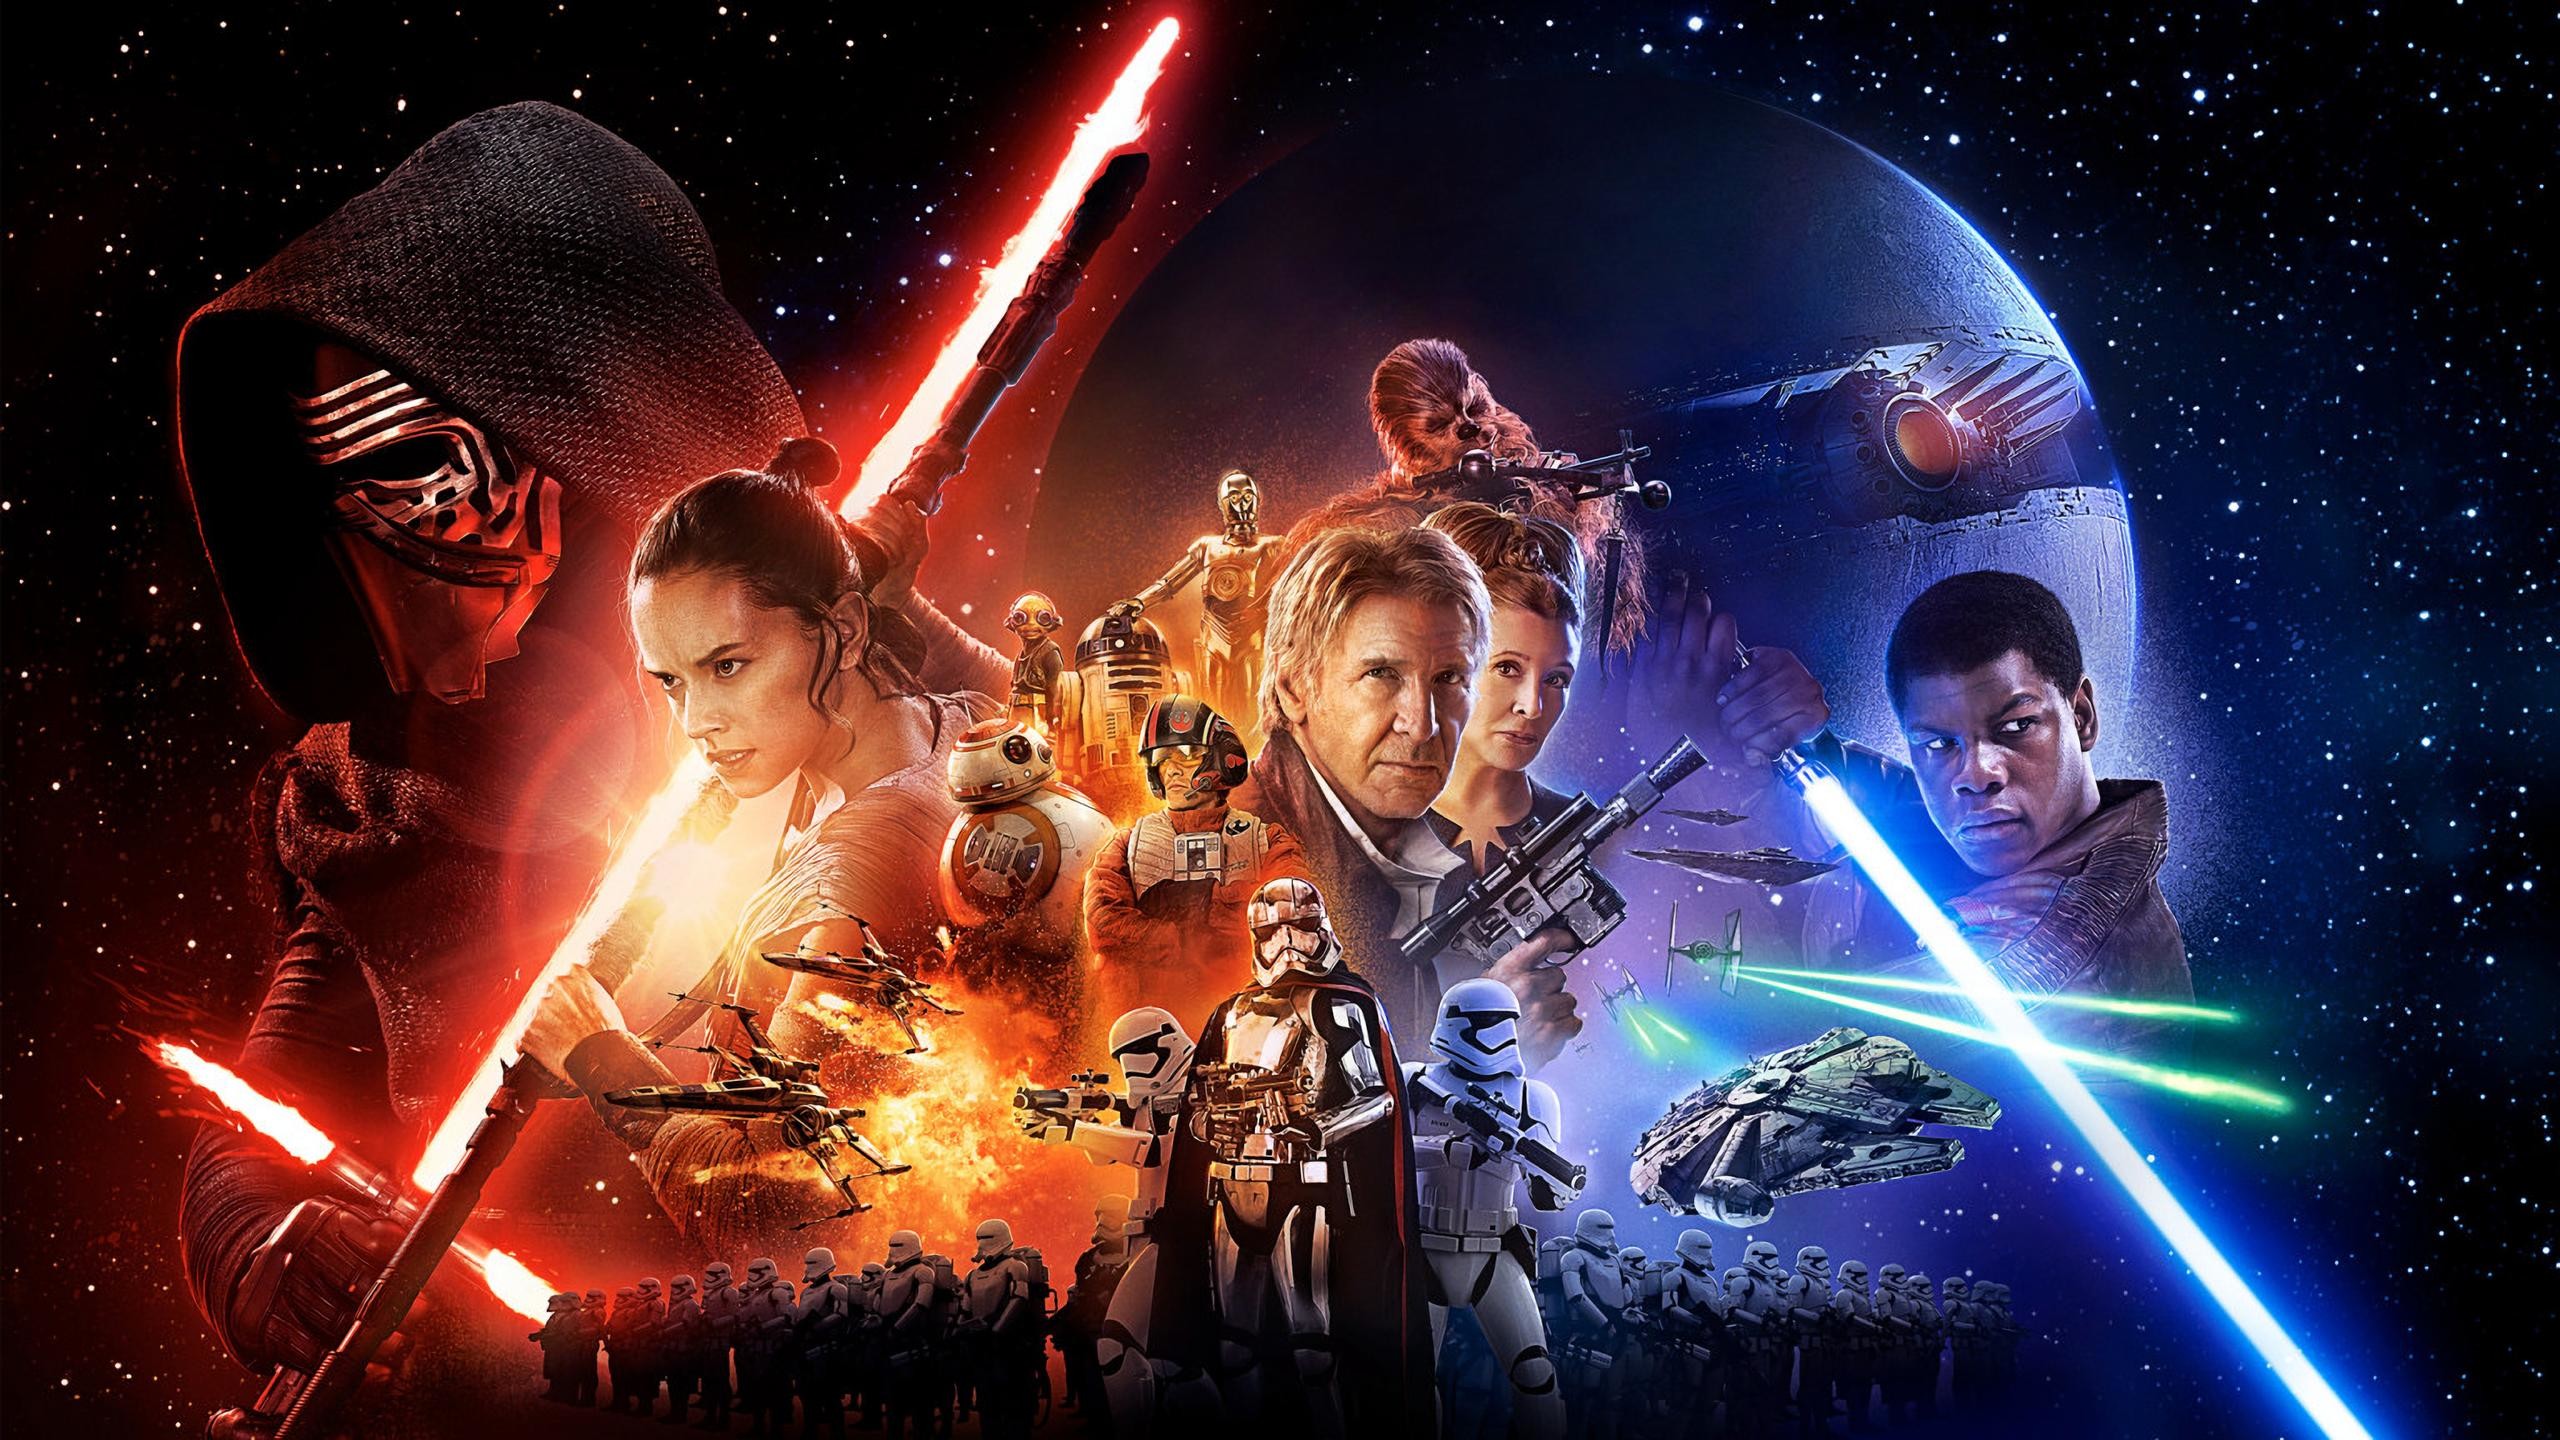 2560x1440 193 Star Wars Episode VII: The Force Awakens HD Wallpapers | Backgrounds -  Wallpaper Abyss